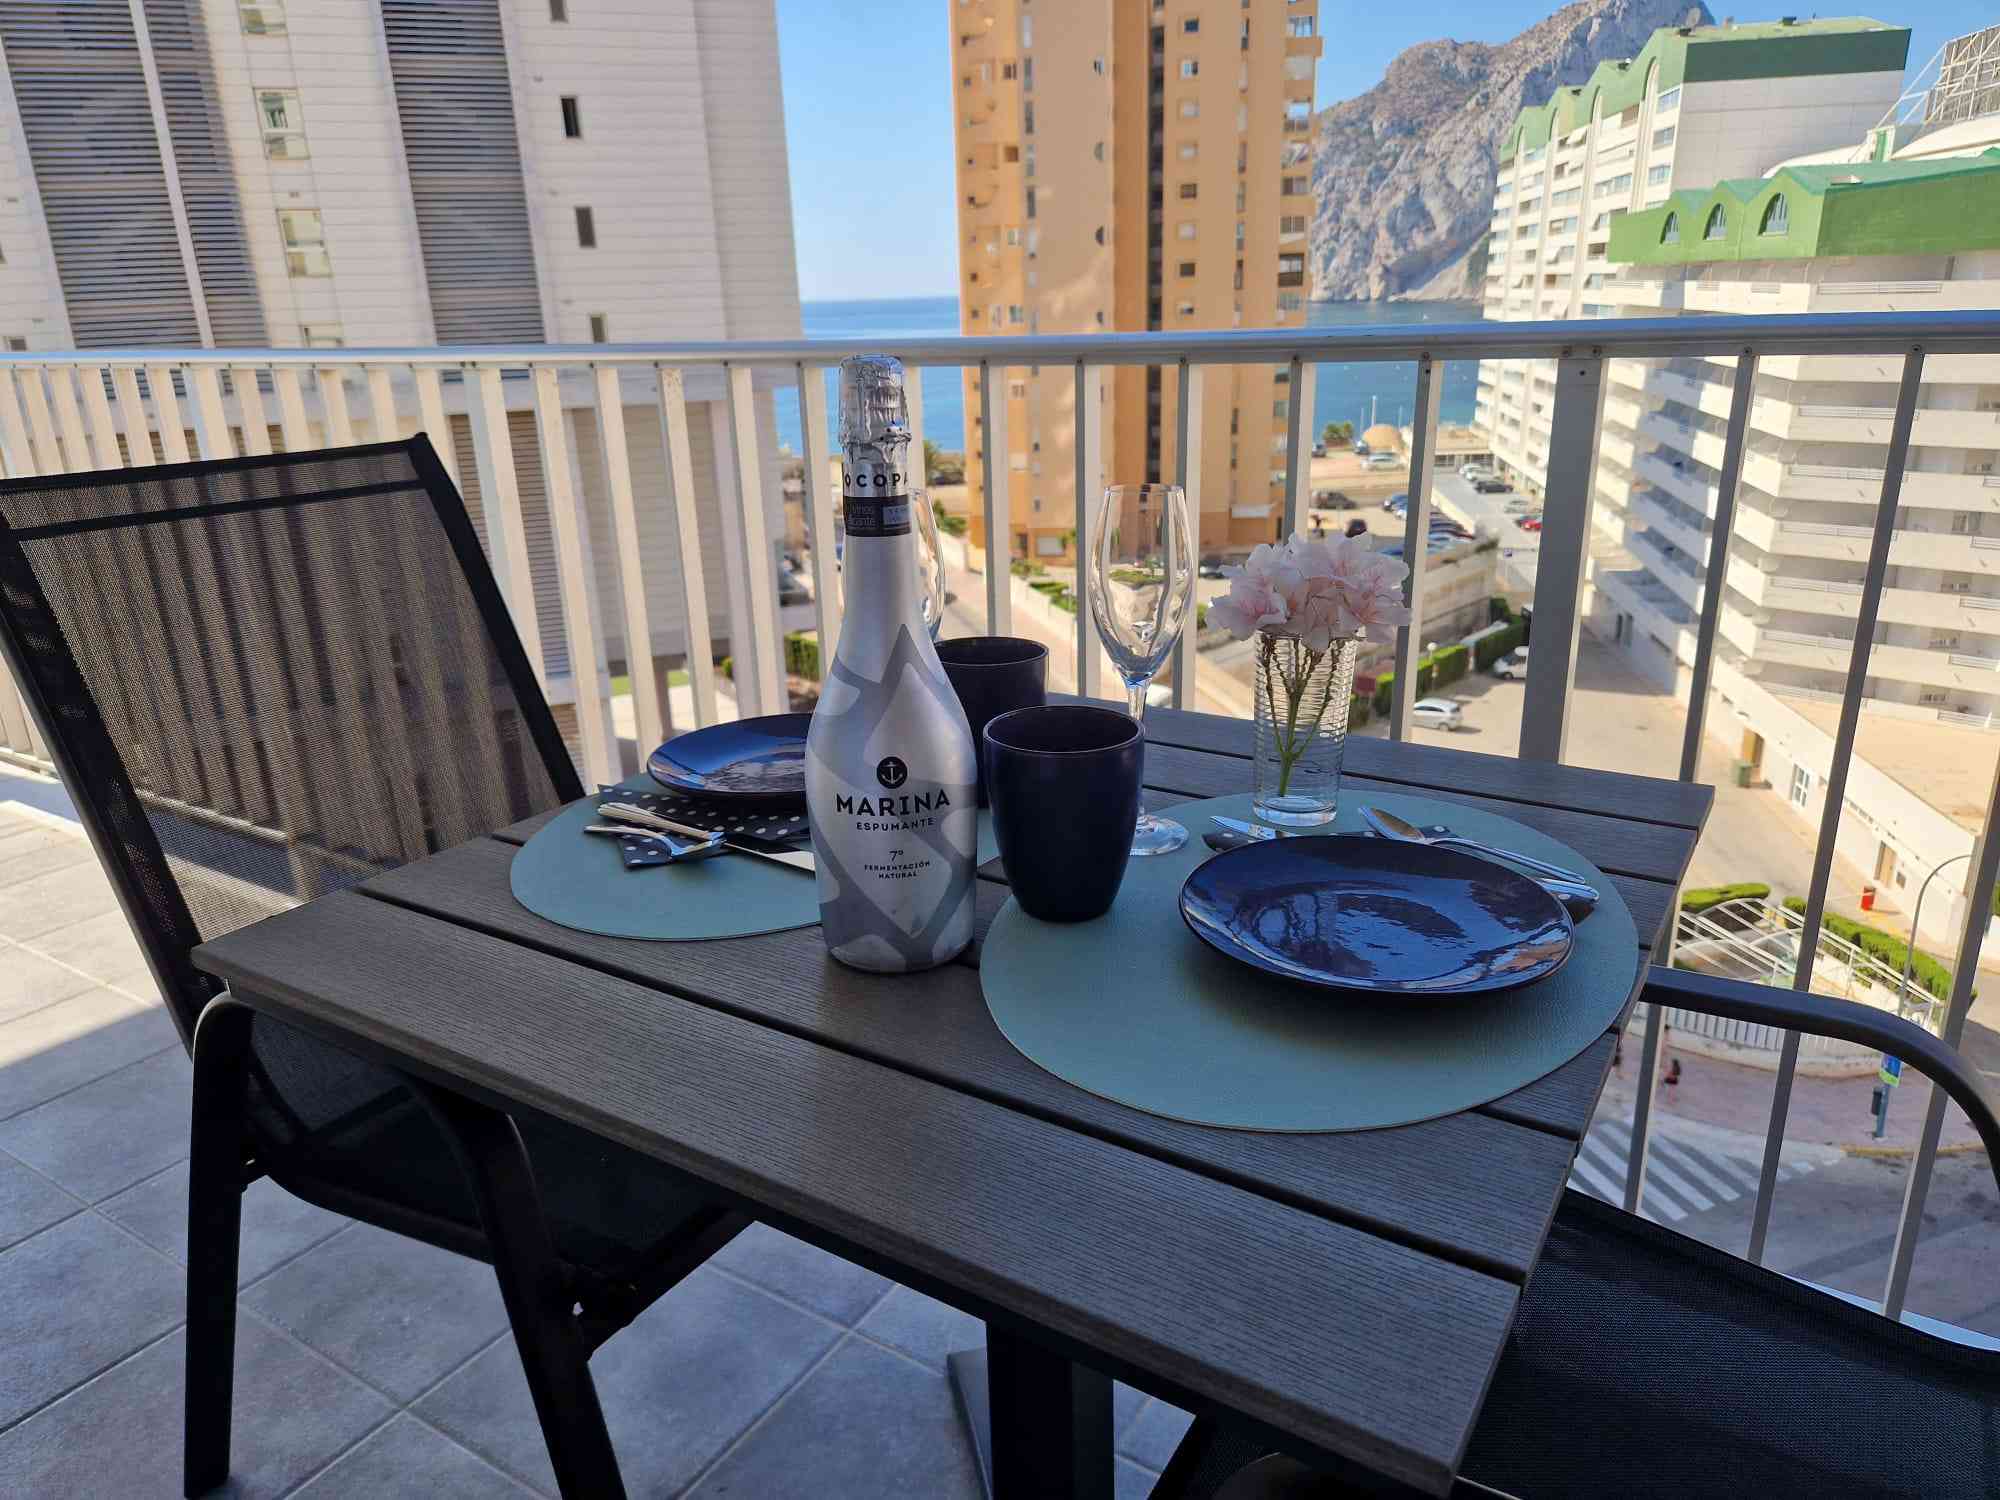 100 METERS FROM THE BEACH AND COVES, THIS BEAUTIFUL 2 BEDROOM APARTMENT IN CALPE IS SOLD